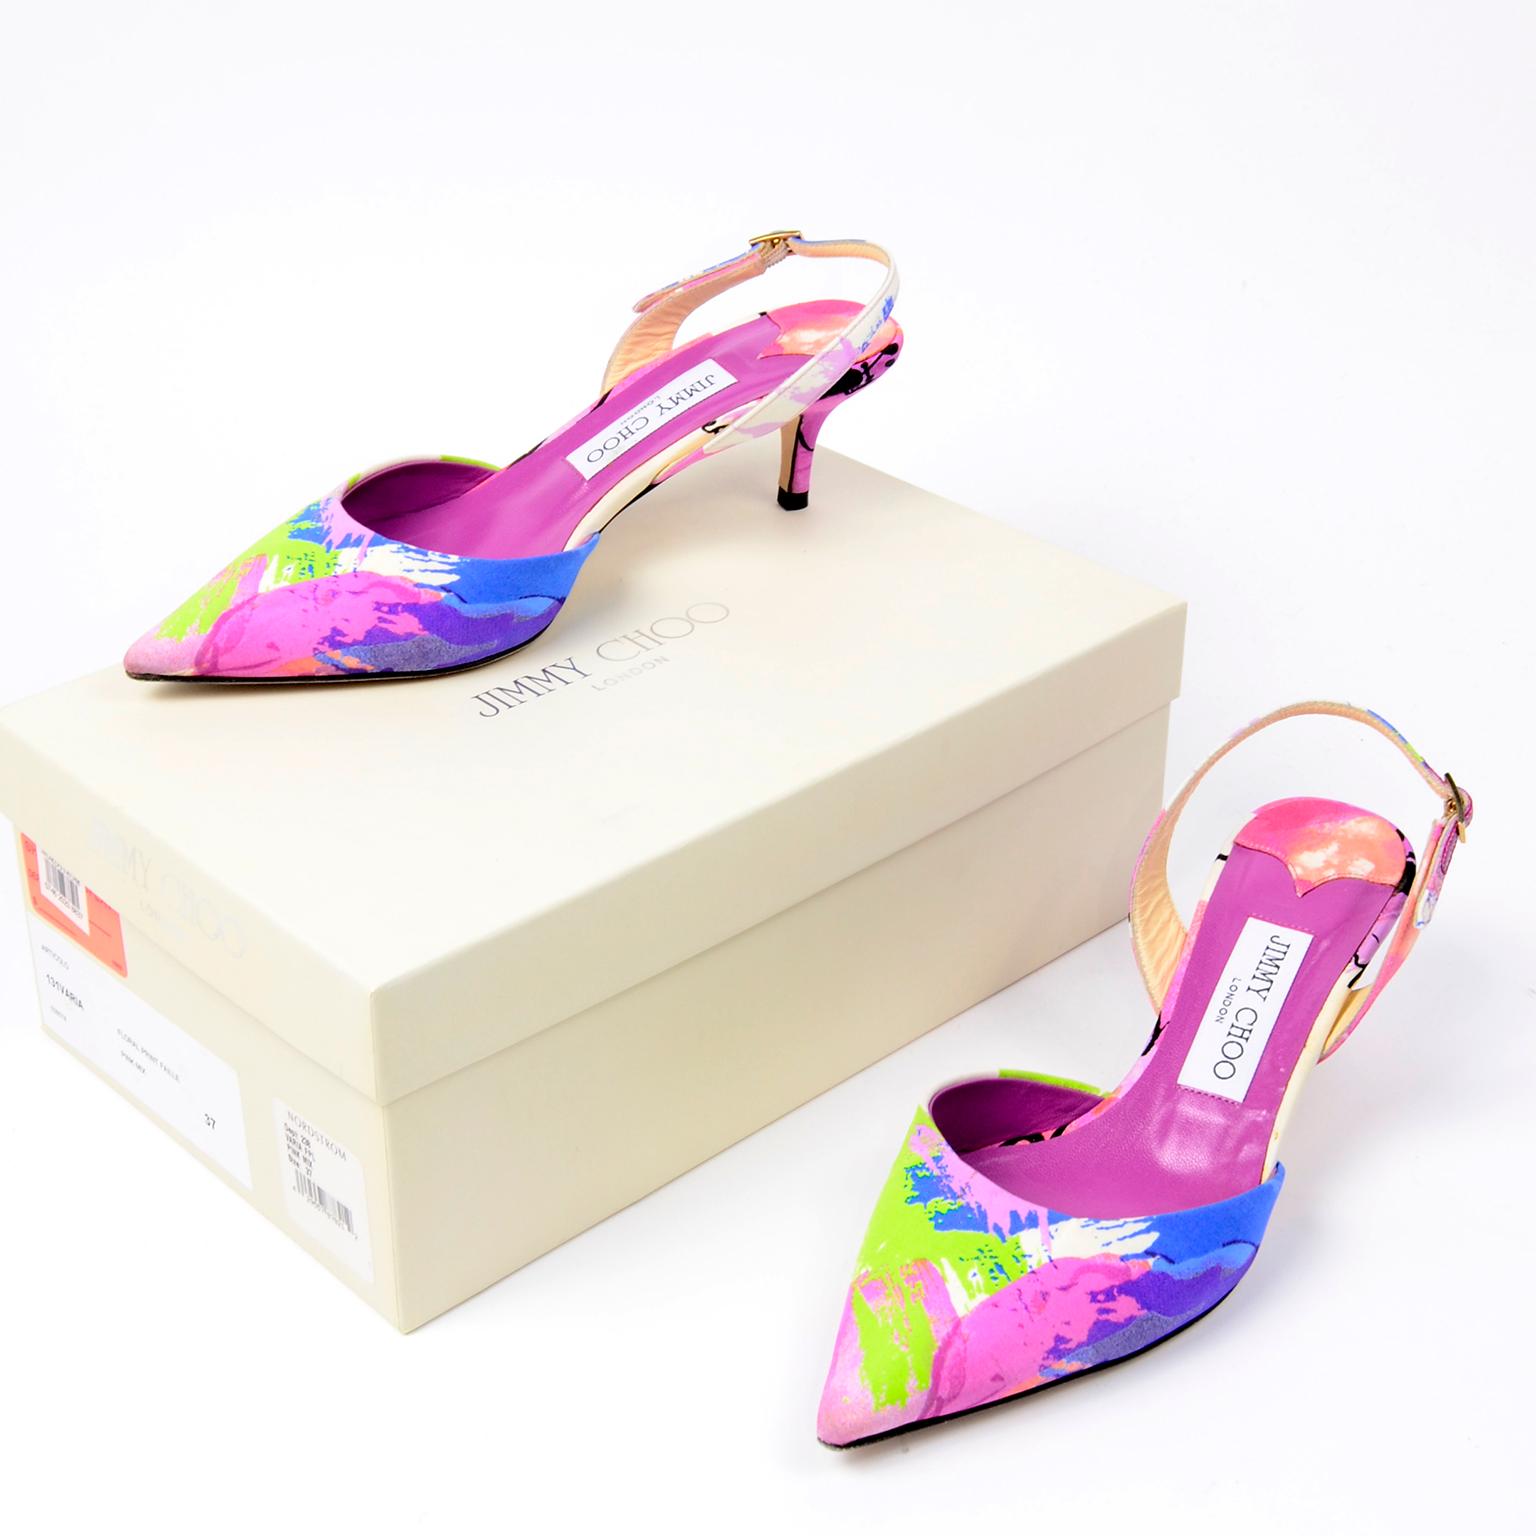 These pretty Jimmy Choo Slingback shoes are bursting with color! The abstract floral print is in shades of lime green, purple, pink and blue. The shoes were made in Italy and come with their original box.These are such great vintage shoes for Spring